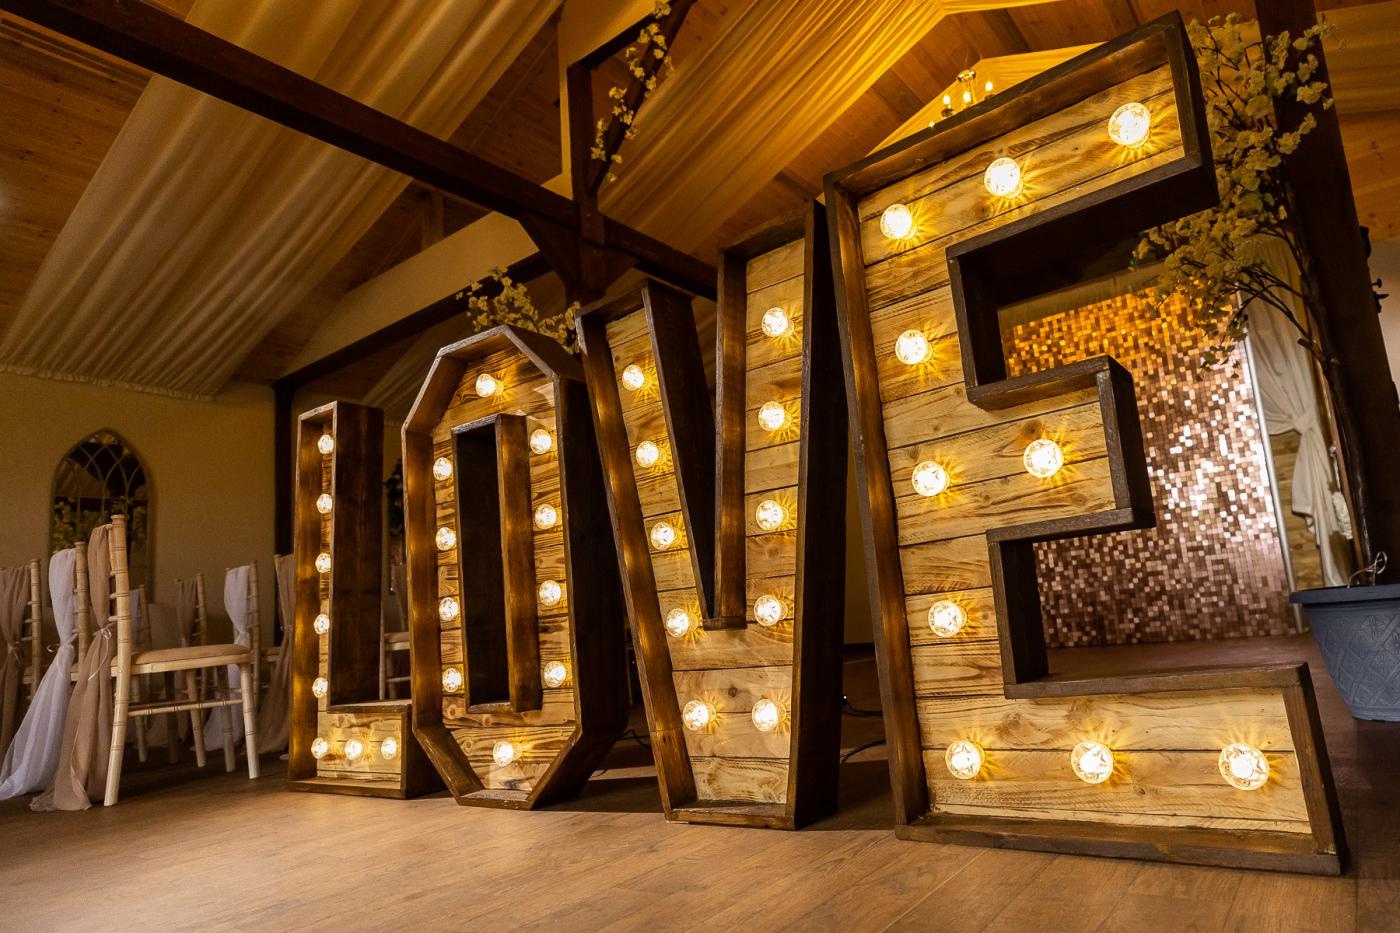 Rustic Love Letters in a Barn